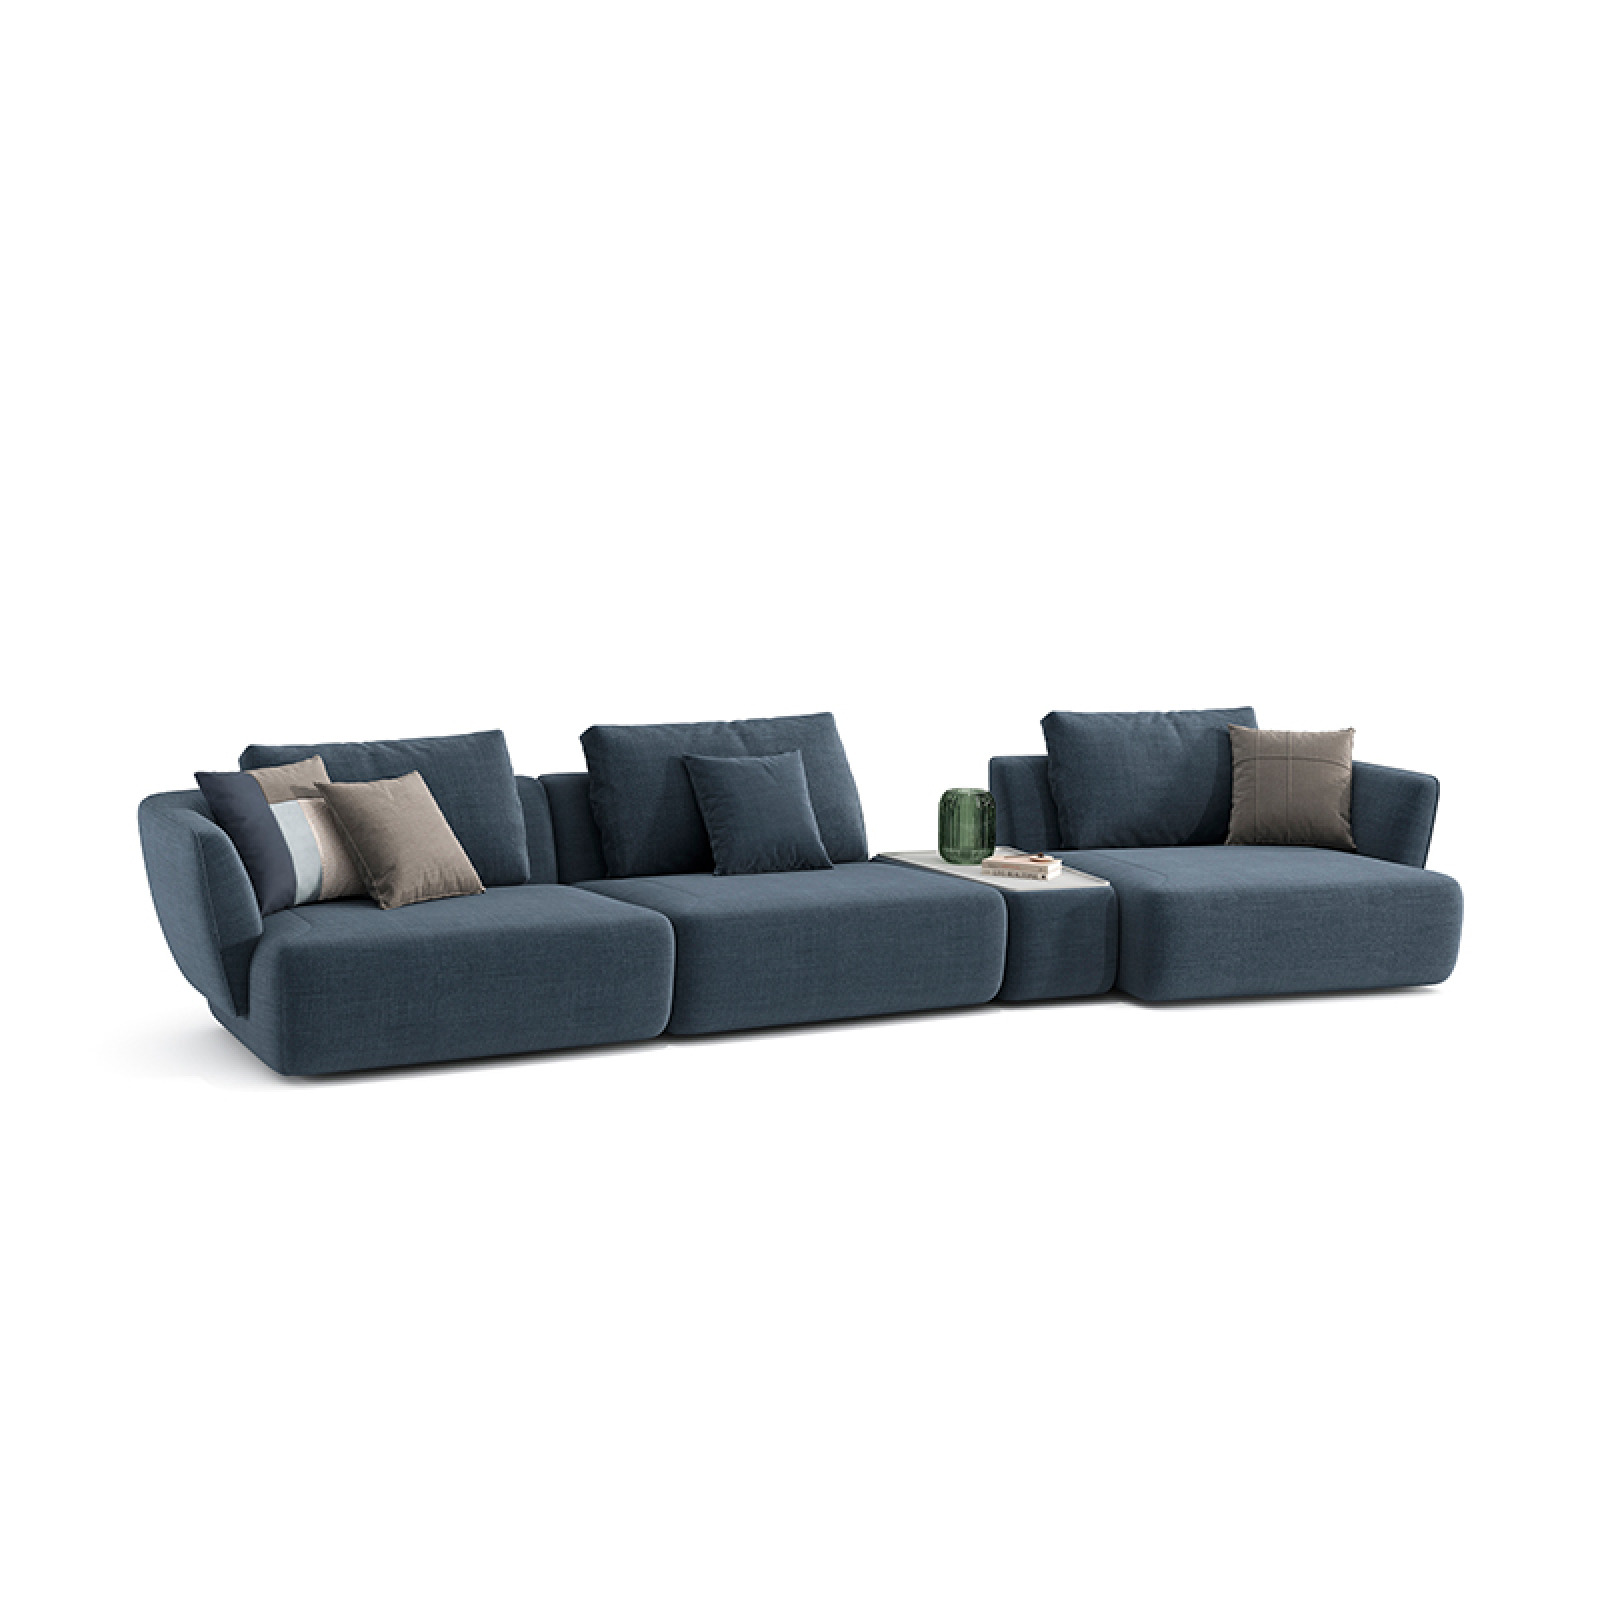 Lugano sofa with built in coffee table